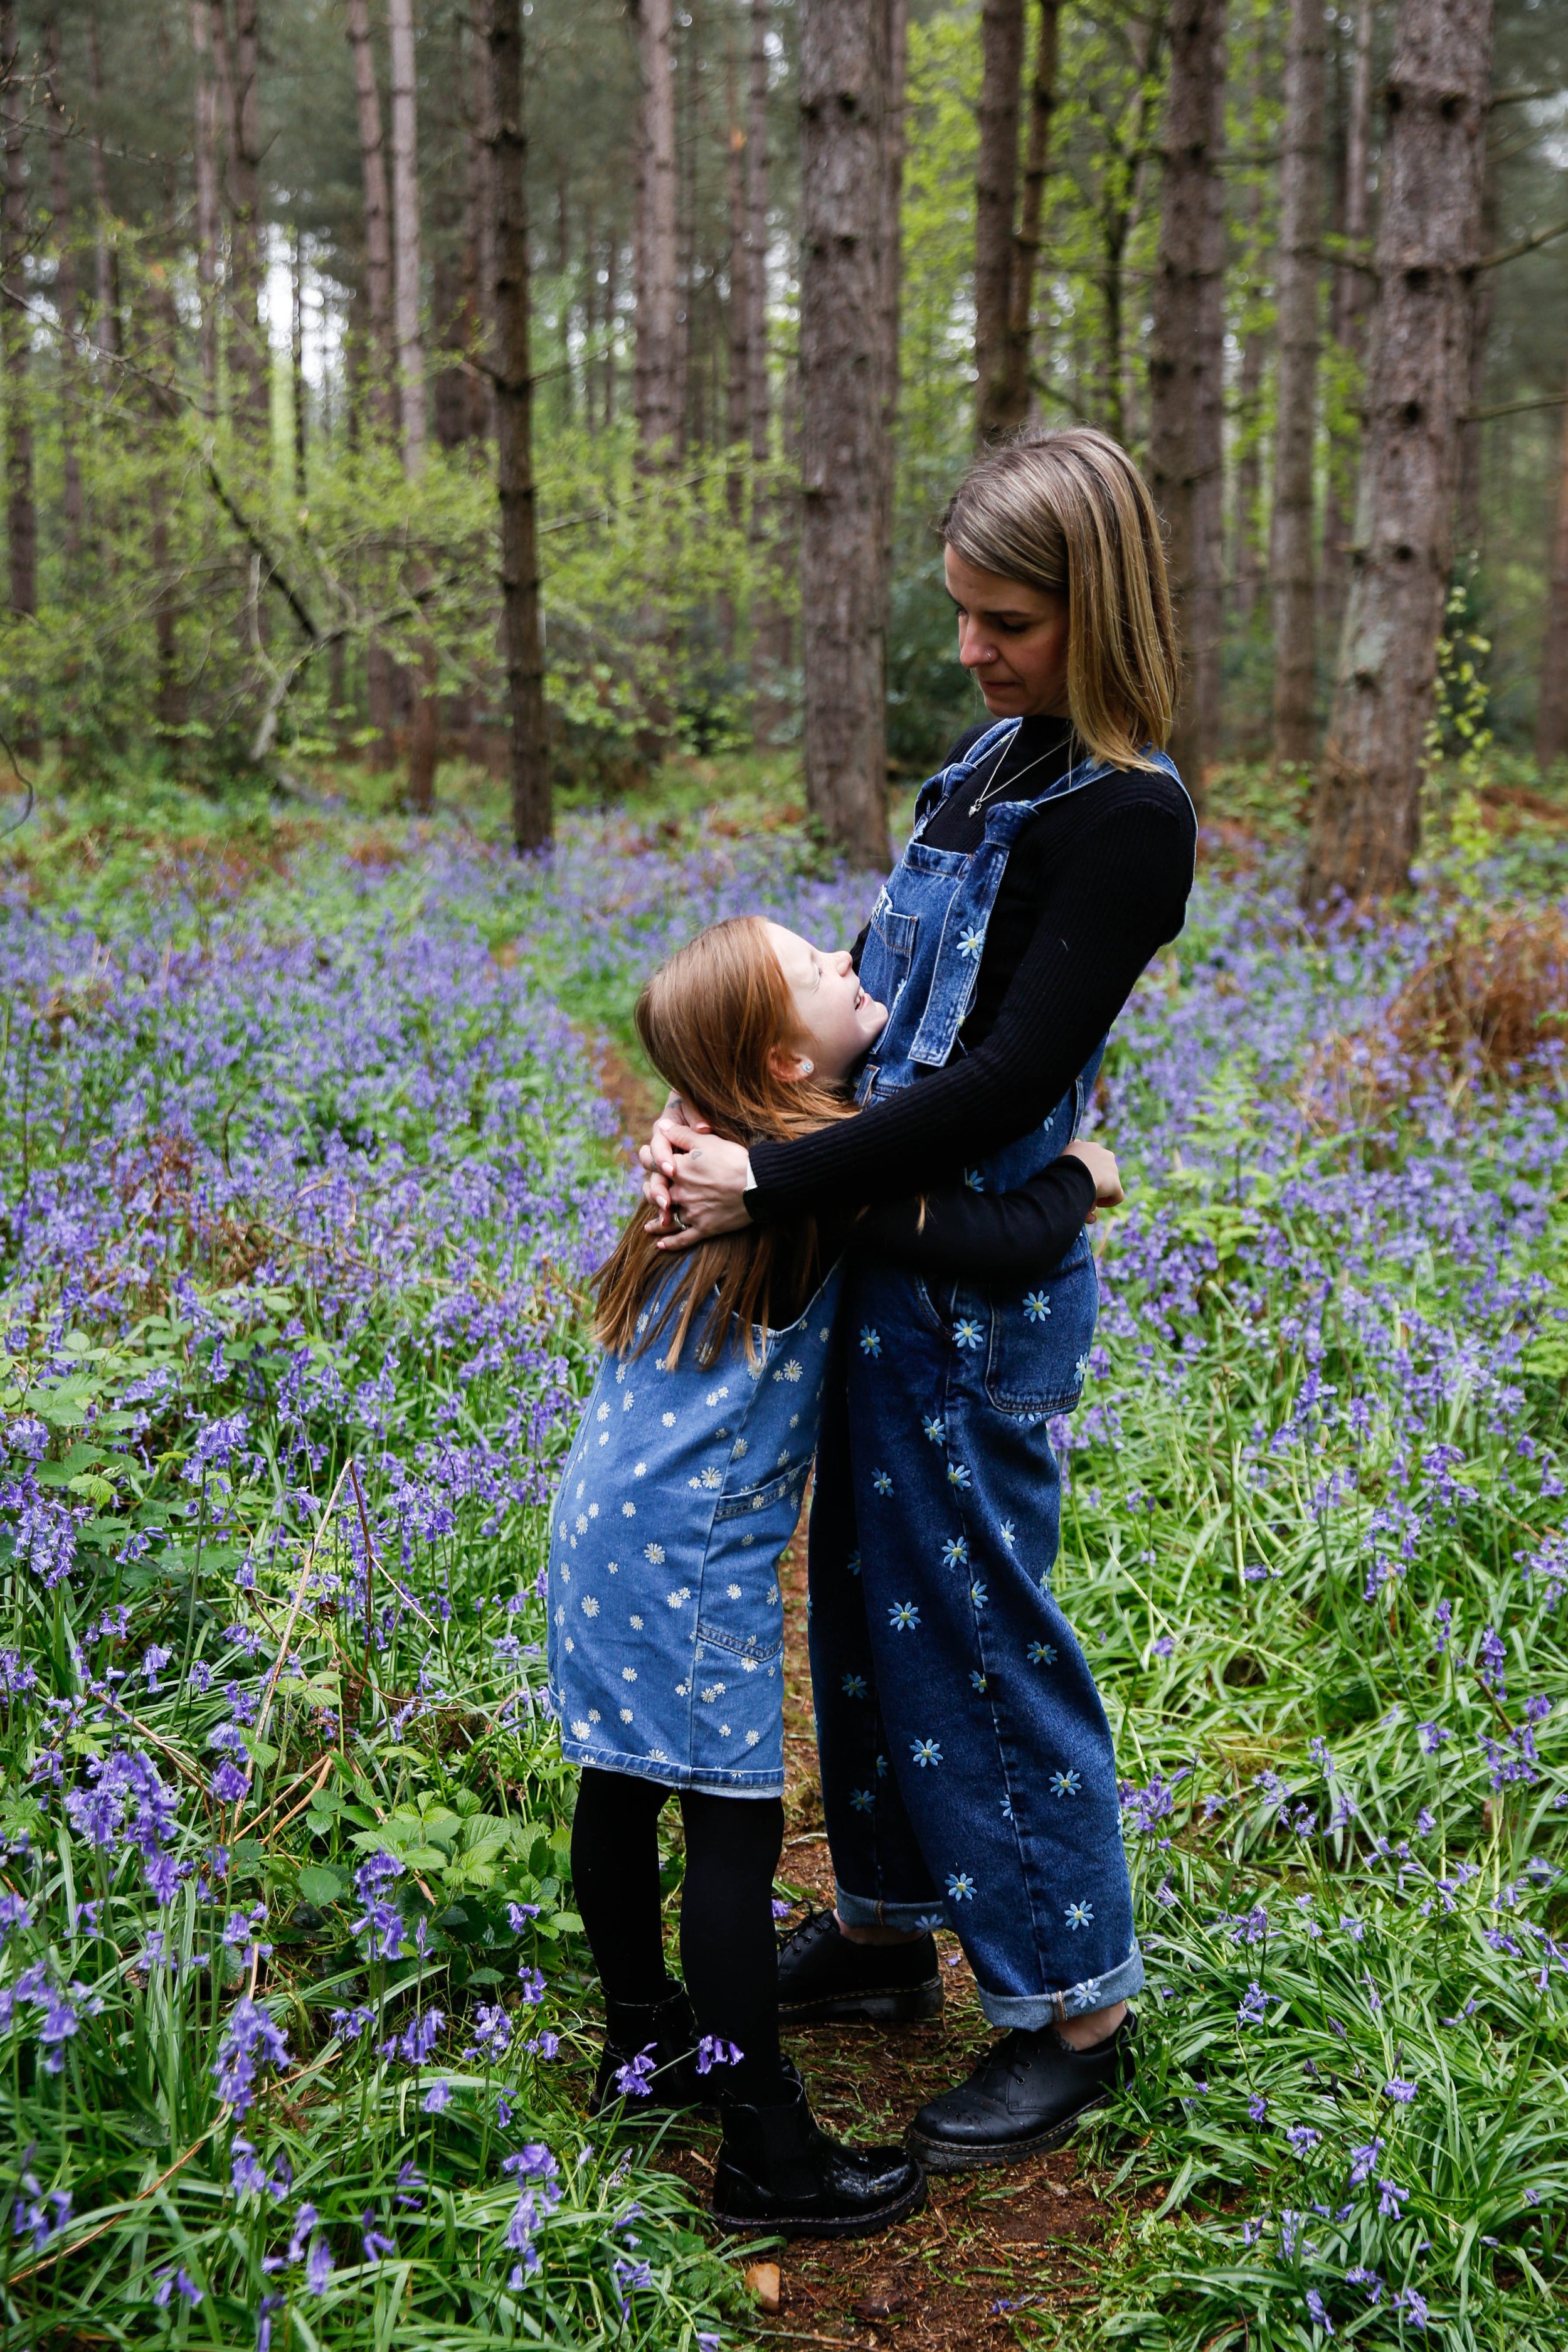 MUM AND DAUGHTER PHOTO SHOOT IN THE BLUEBELLS | BERKSHIRE PORTRAIT SHOOTS05 choice .JPG